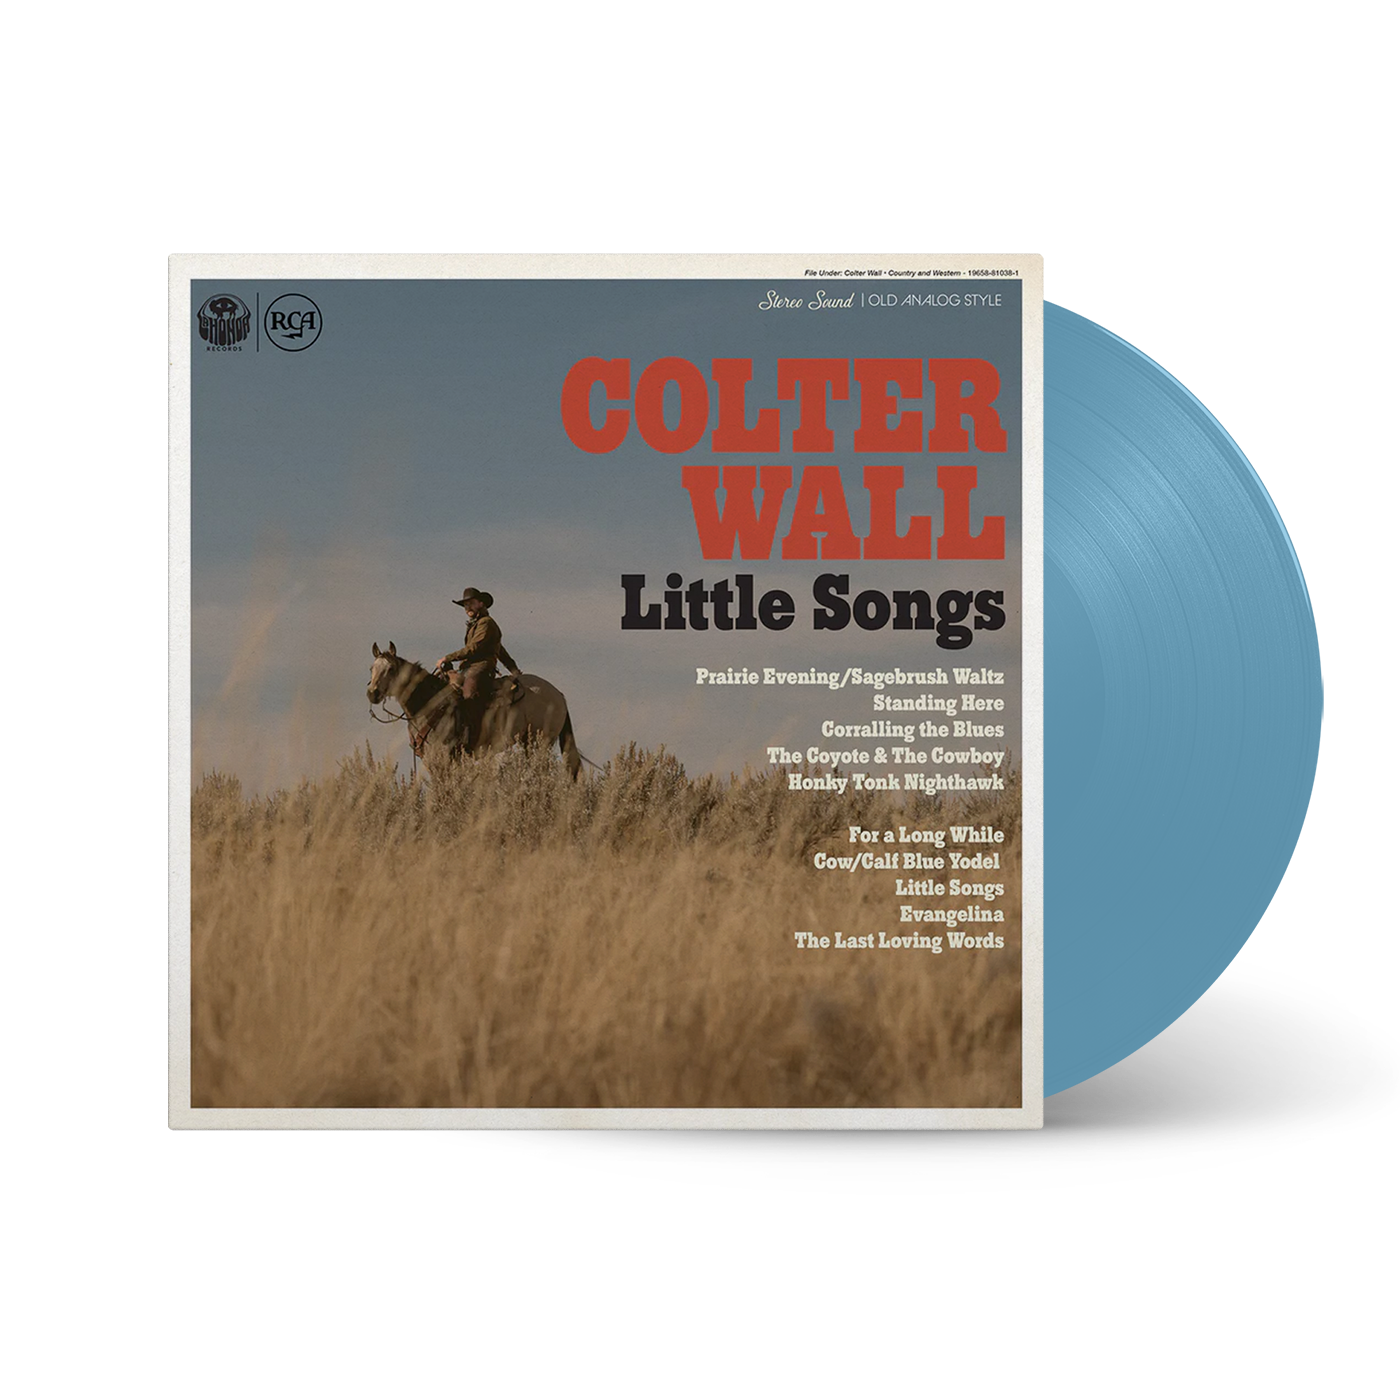 Colter Wall - Little Songs: Limited Blue Vinyl LP